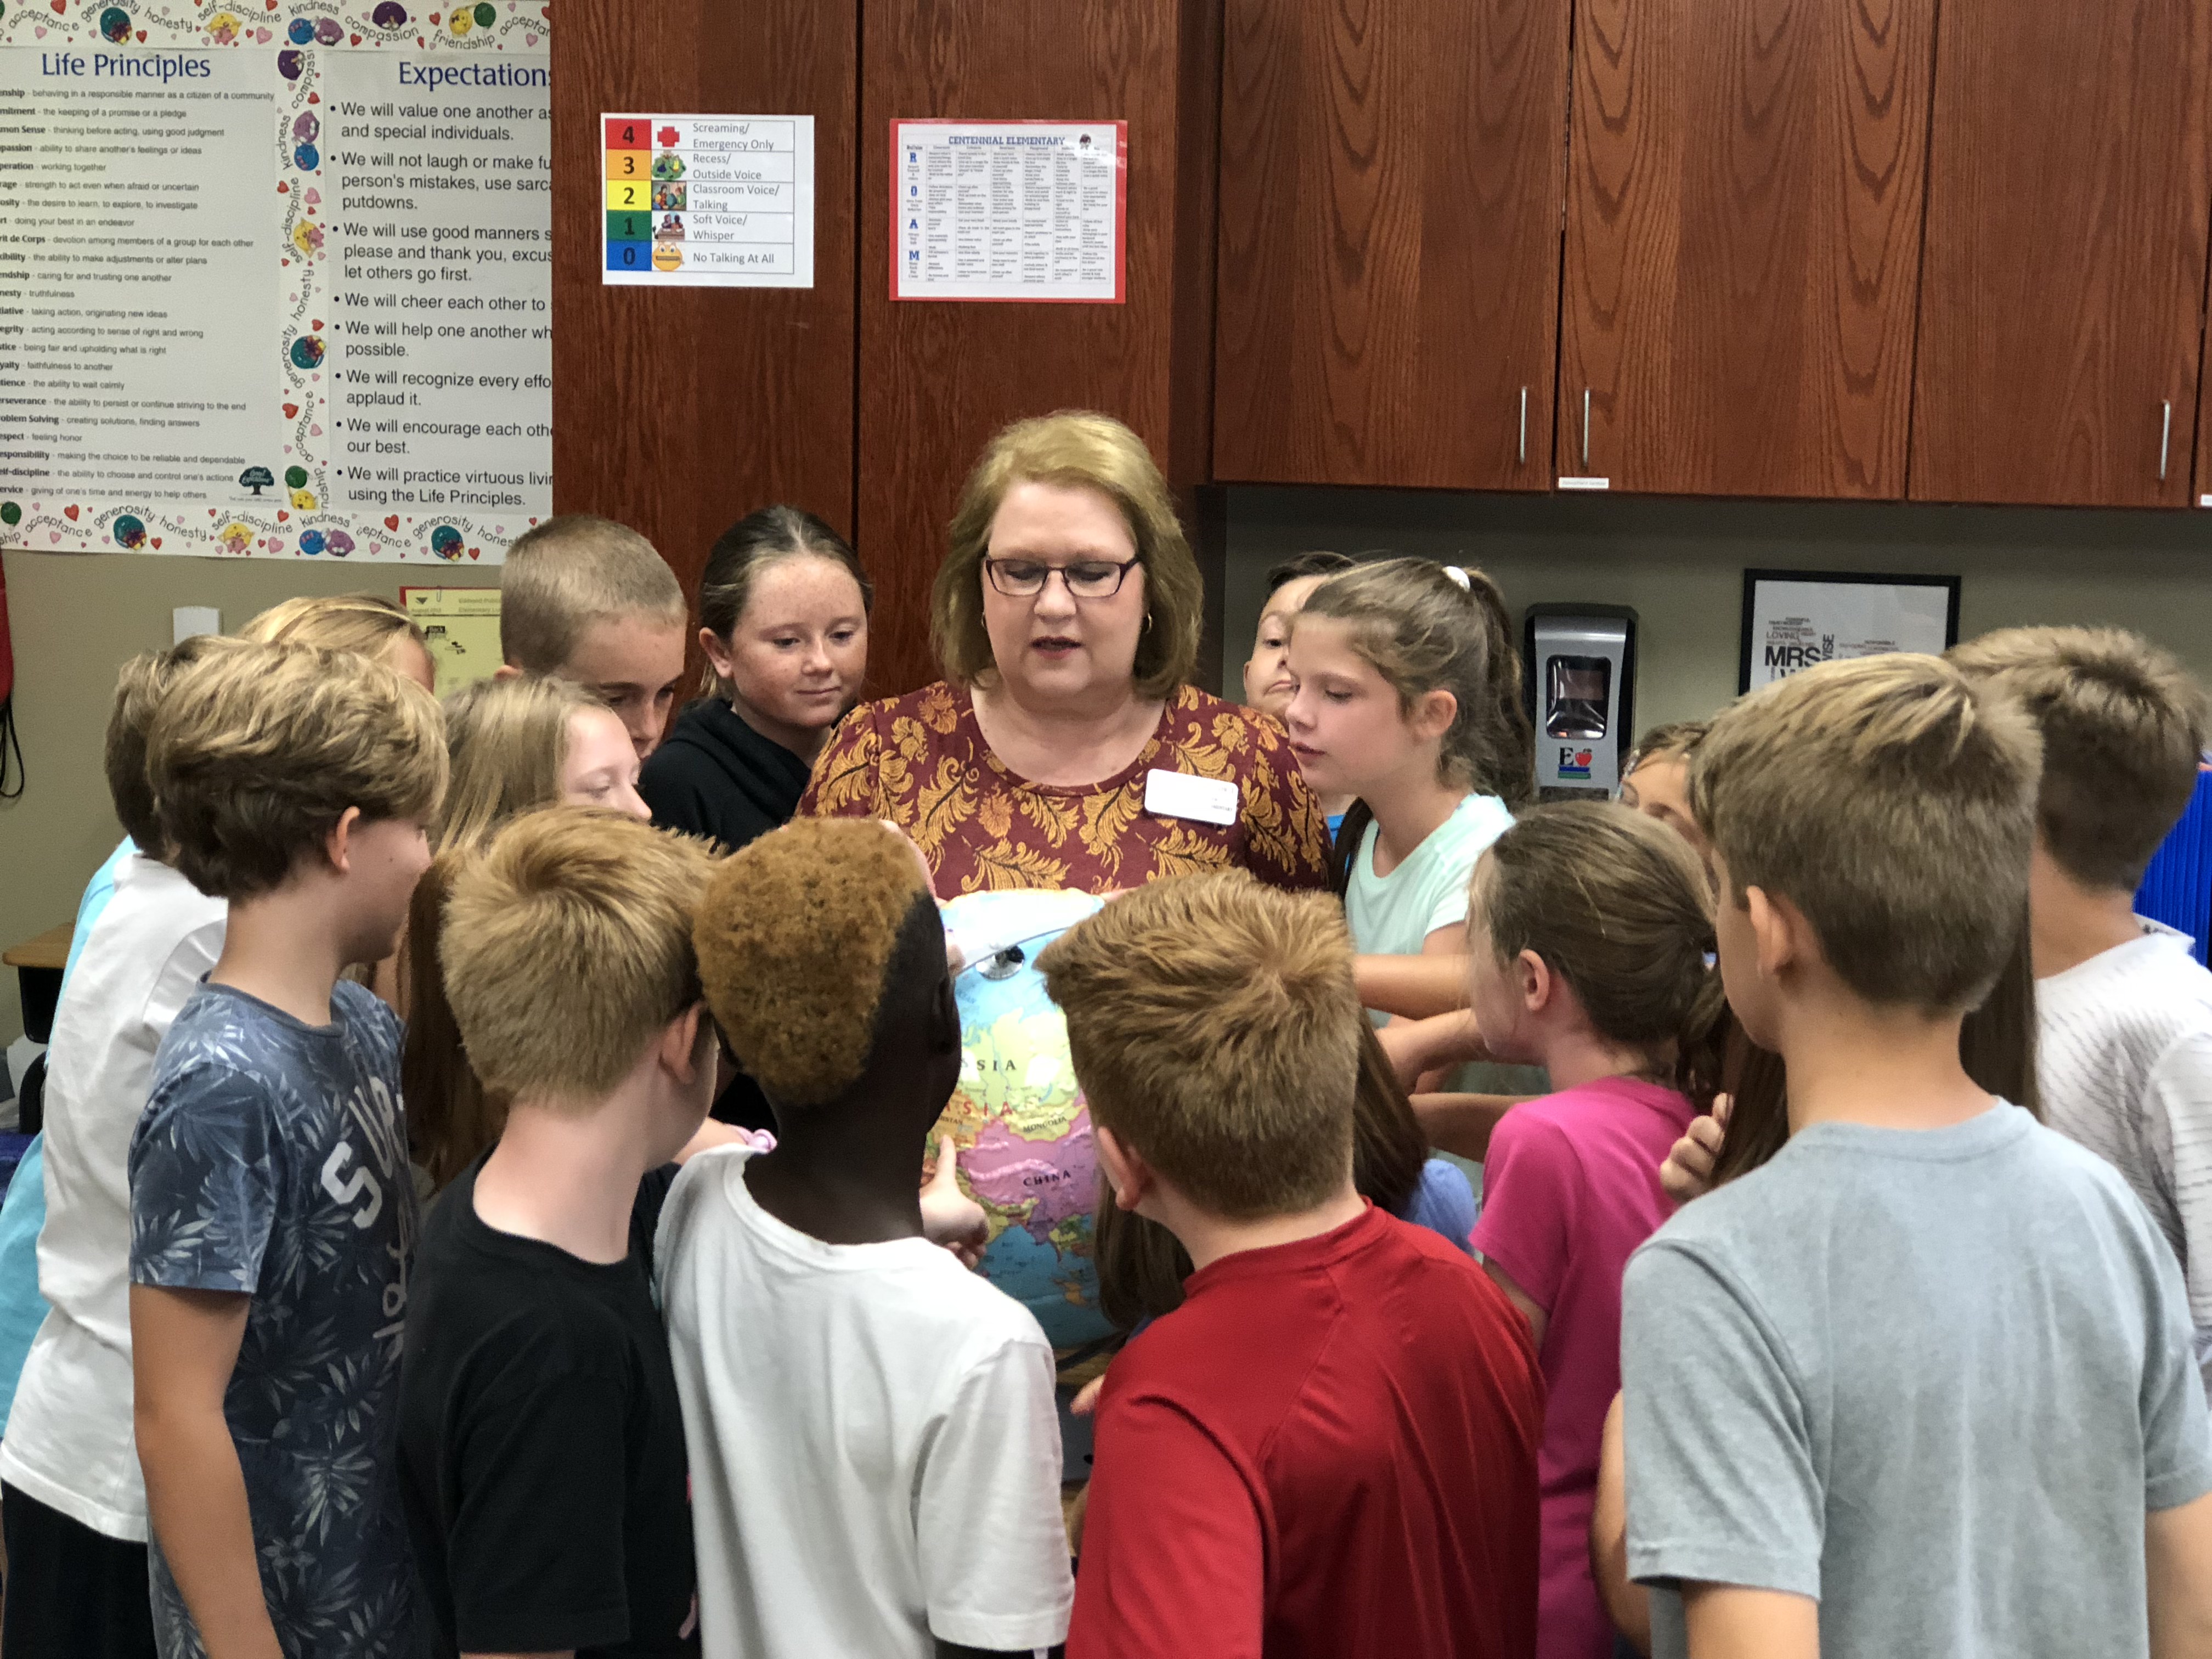 Jane Williams with her 5th grade students at Centennial Elementary School, Edmond, Oklahoma